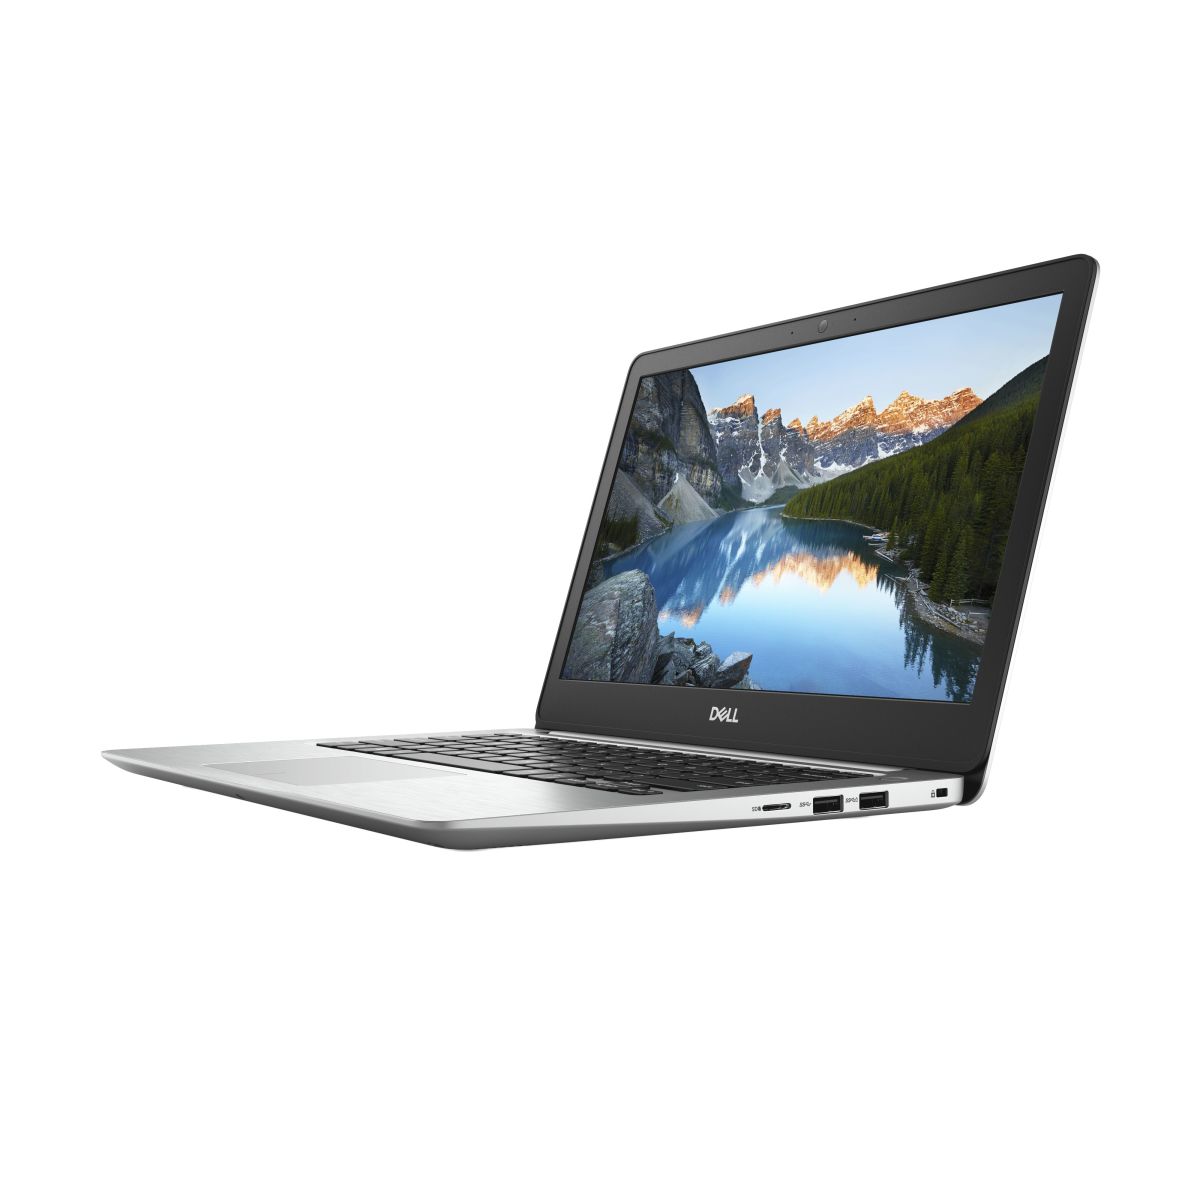 DELL Inspiron 5370 - 5370-INS-1153-SLR laptop specifications